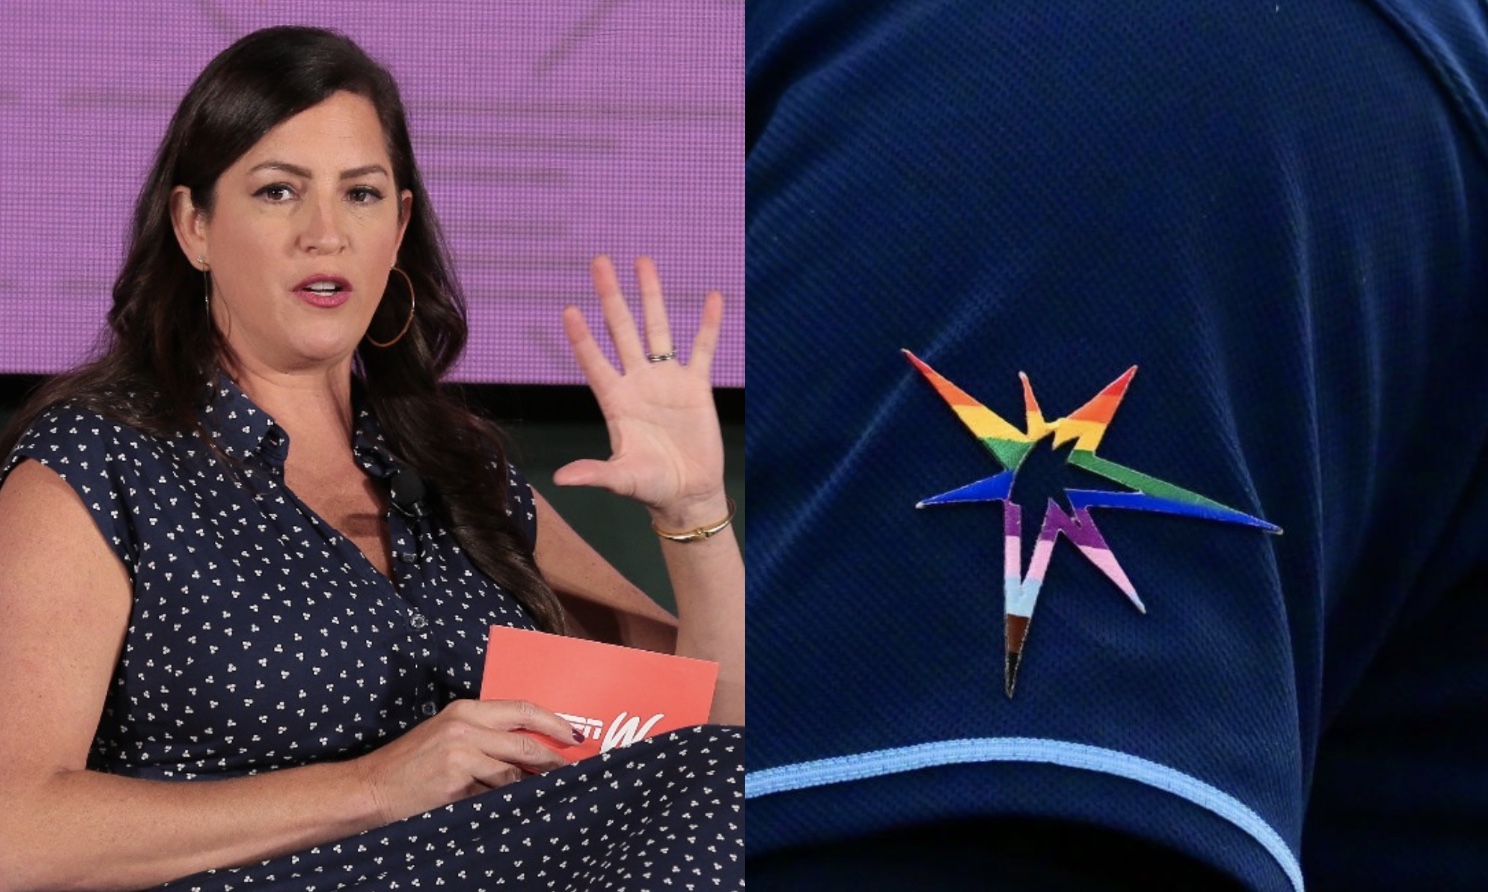 Clay Travis on X: Yesterday @espn's Sarah Spain said on air that Tampa Bay  Rays players who don't wear a pride flag are bigoted and using BS religion.  Imagine turning on sports